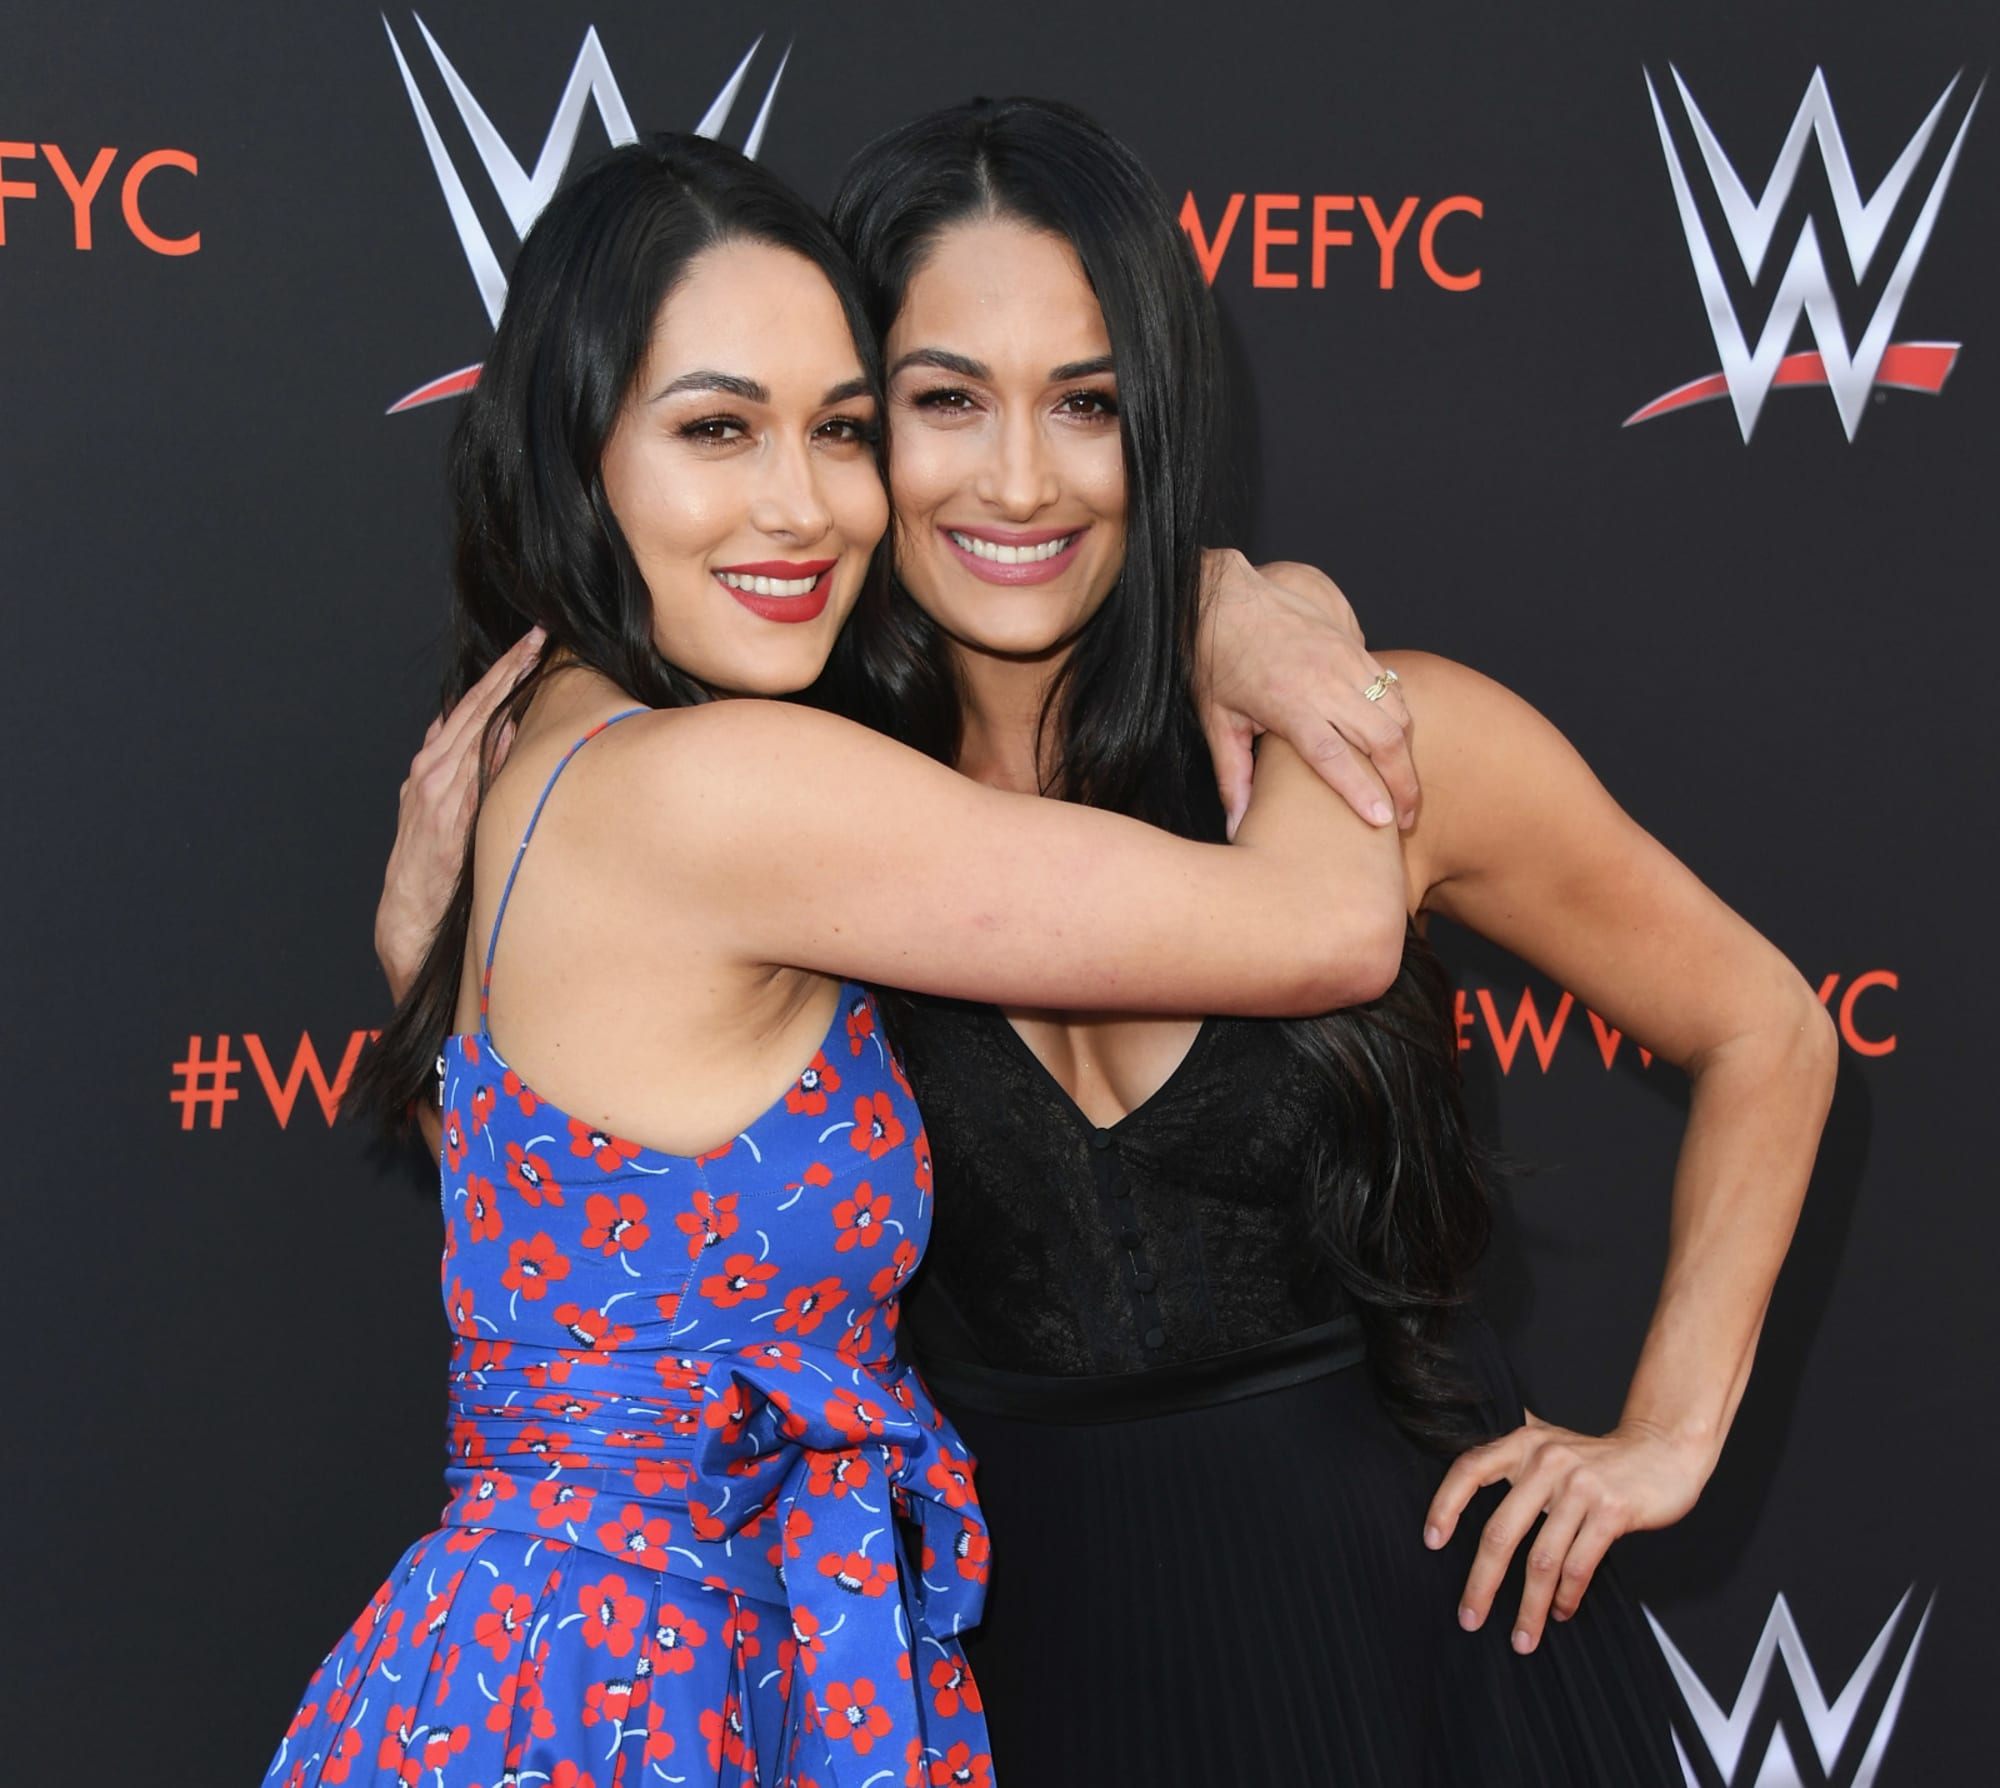 The Bella Twins Deserve Their 2020 Wwe Hall Of Fame Spot